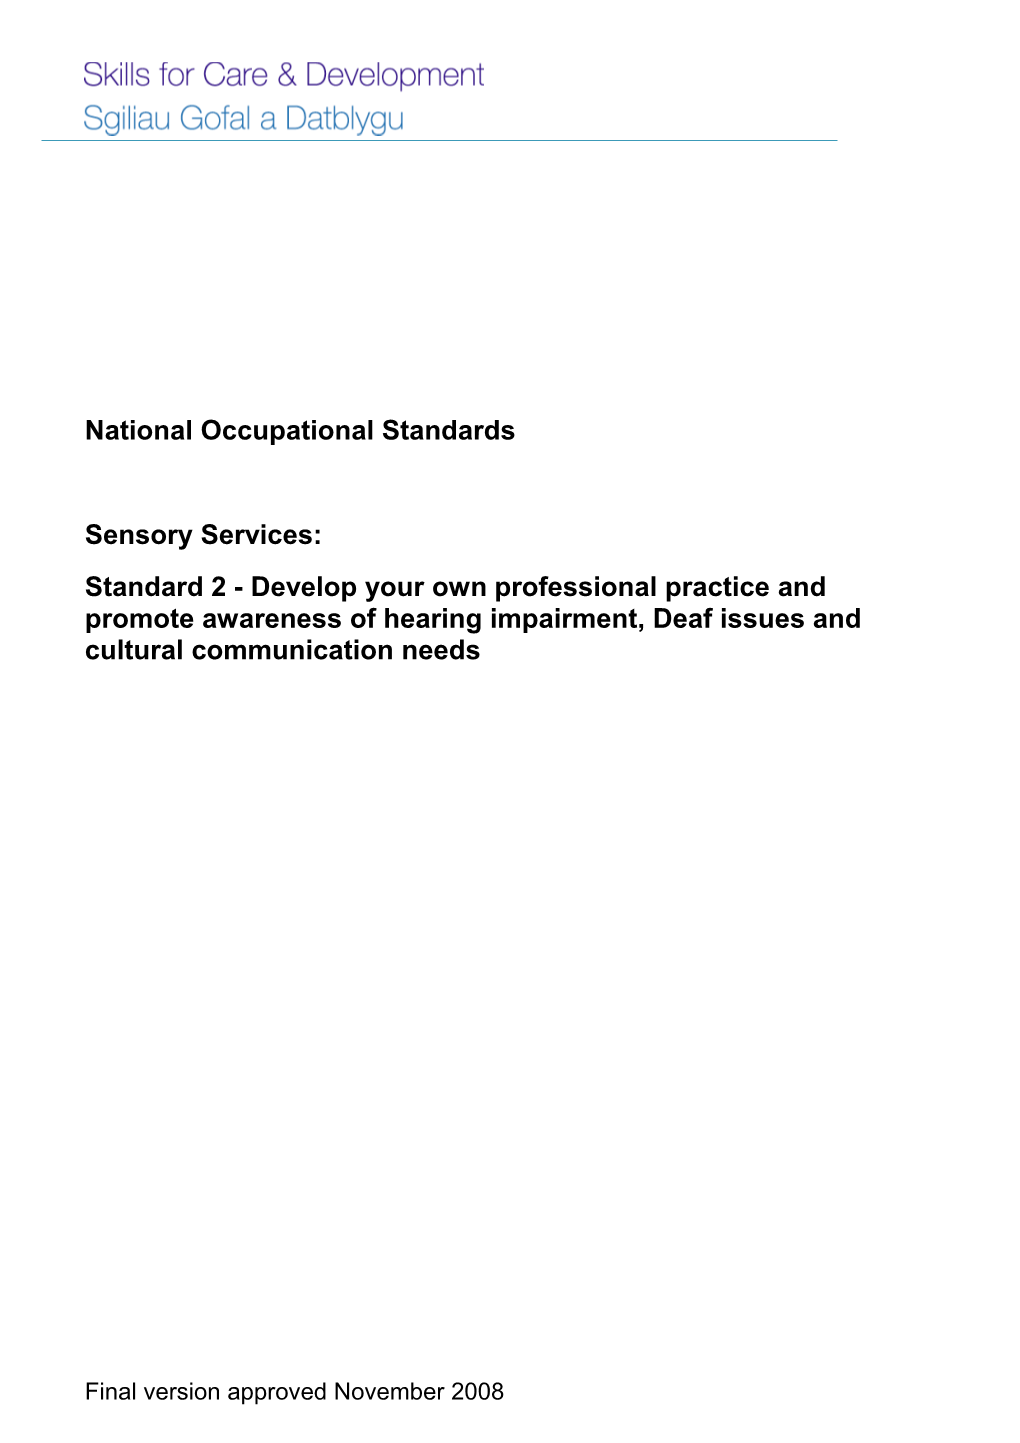 Company Name National Occupational Standards